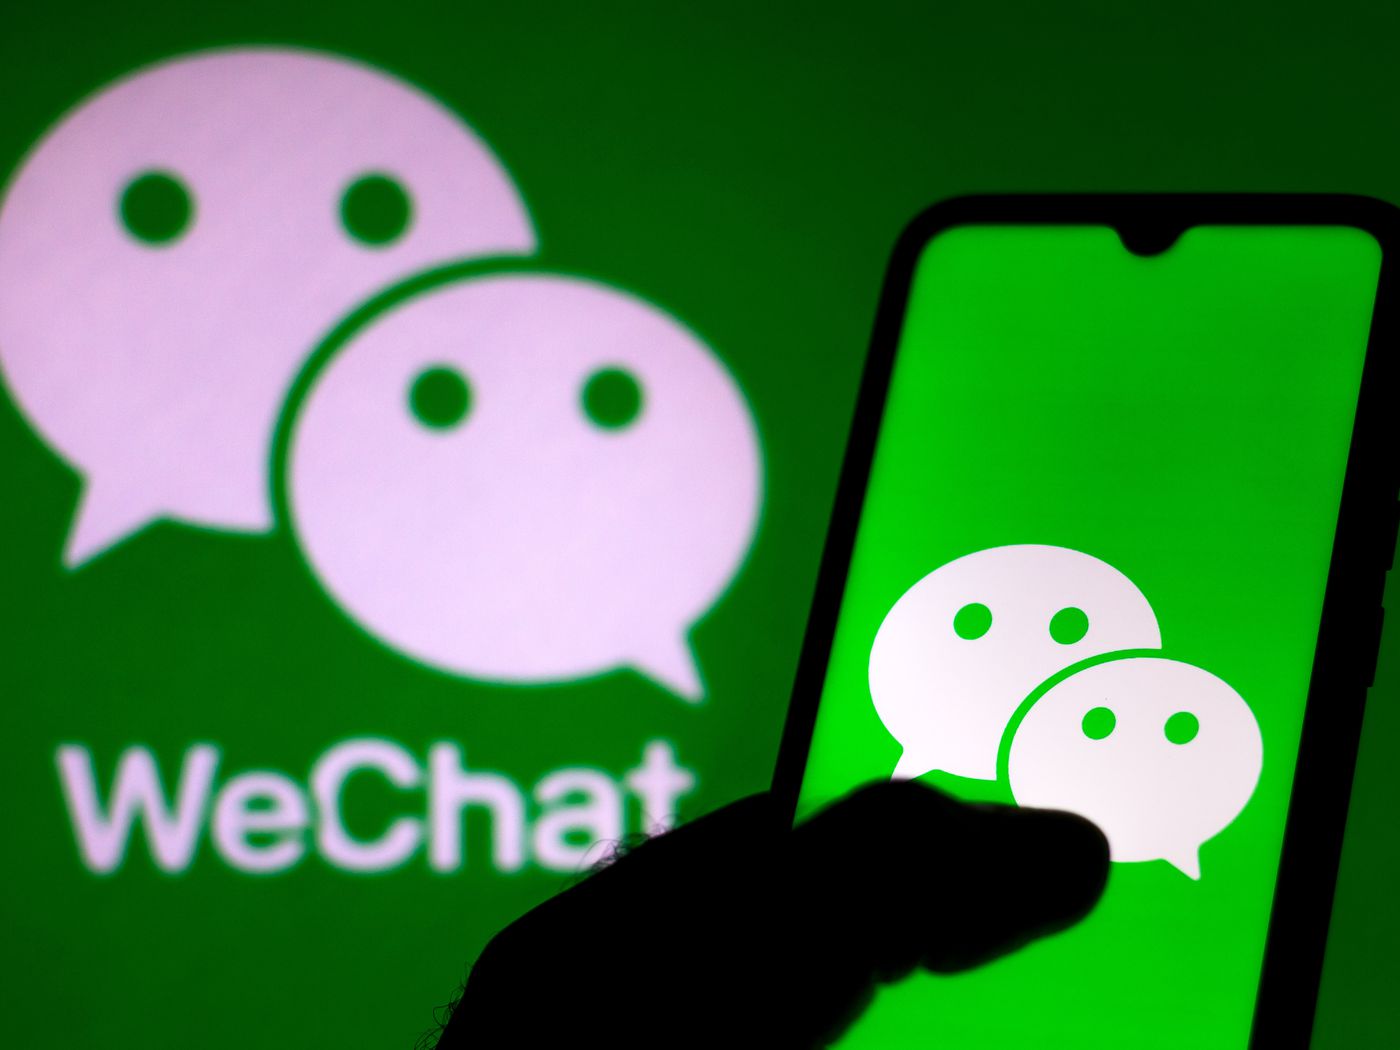 who owns wechat